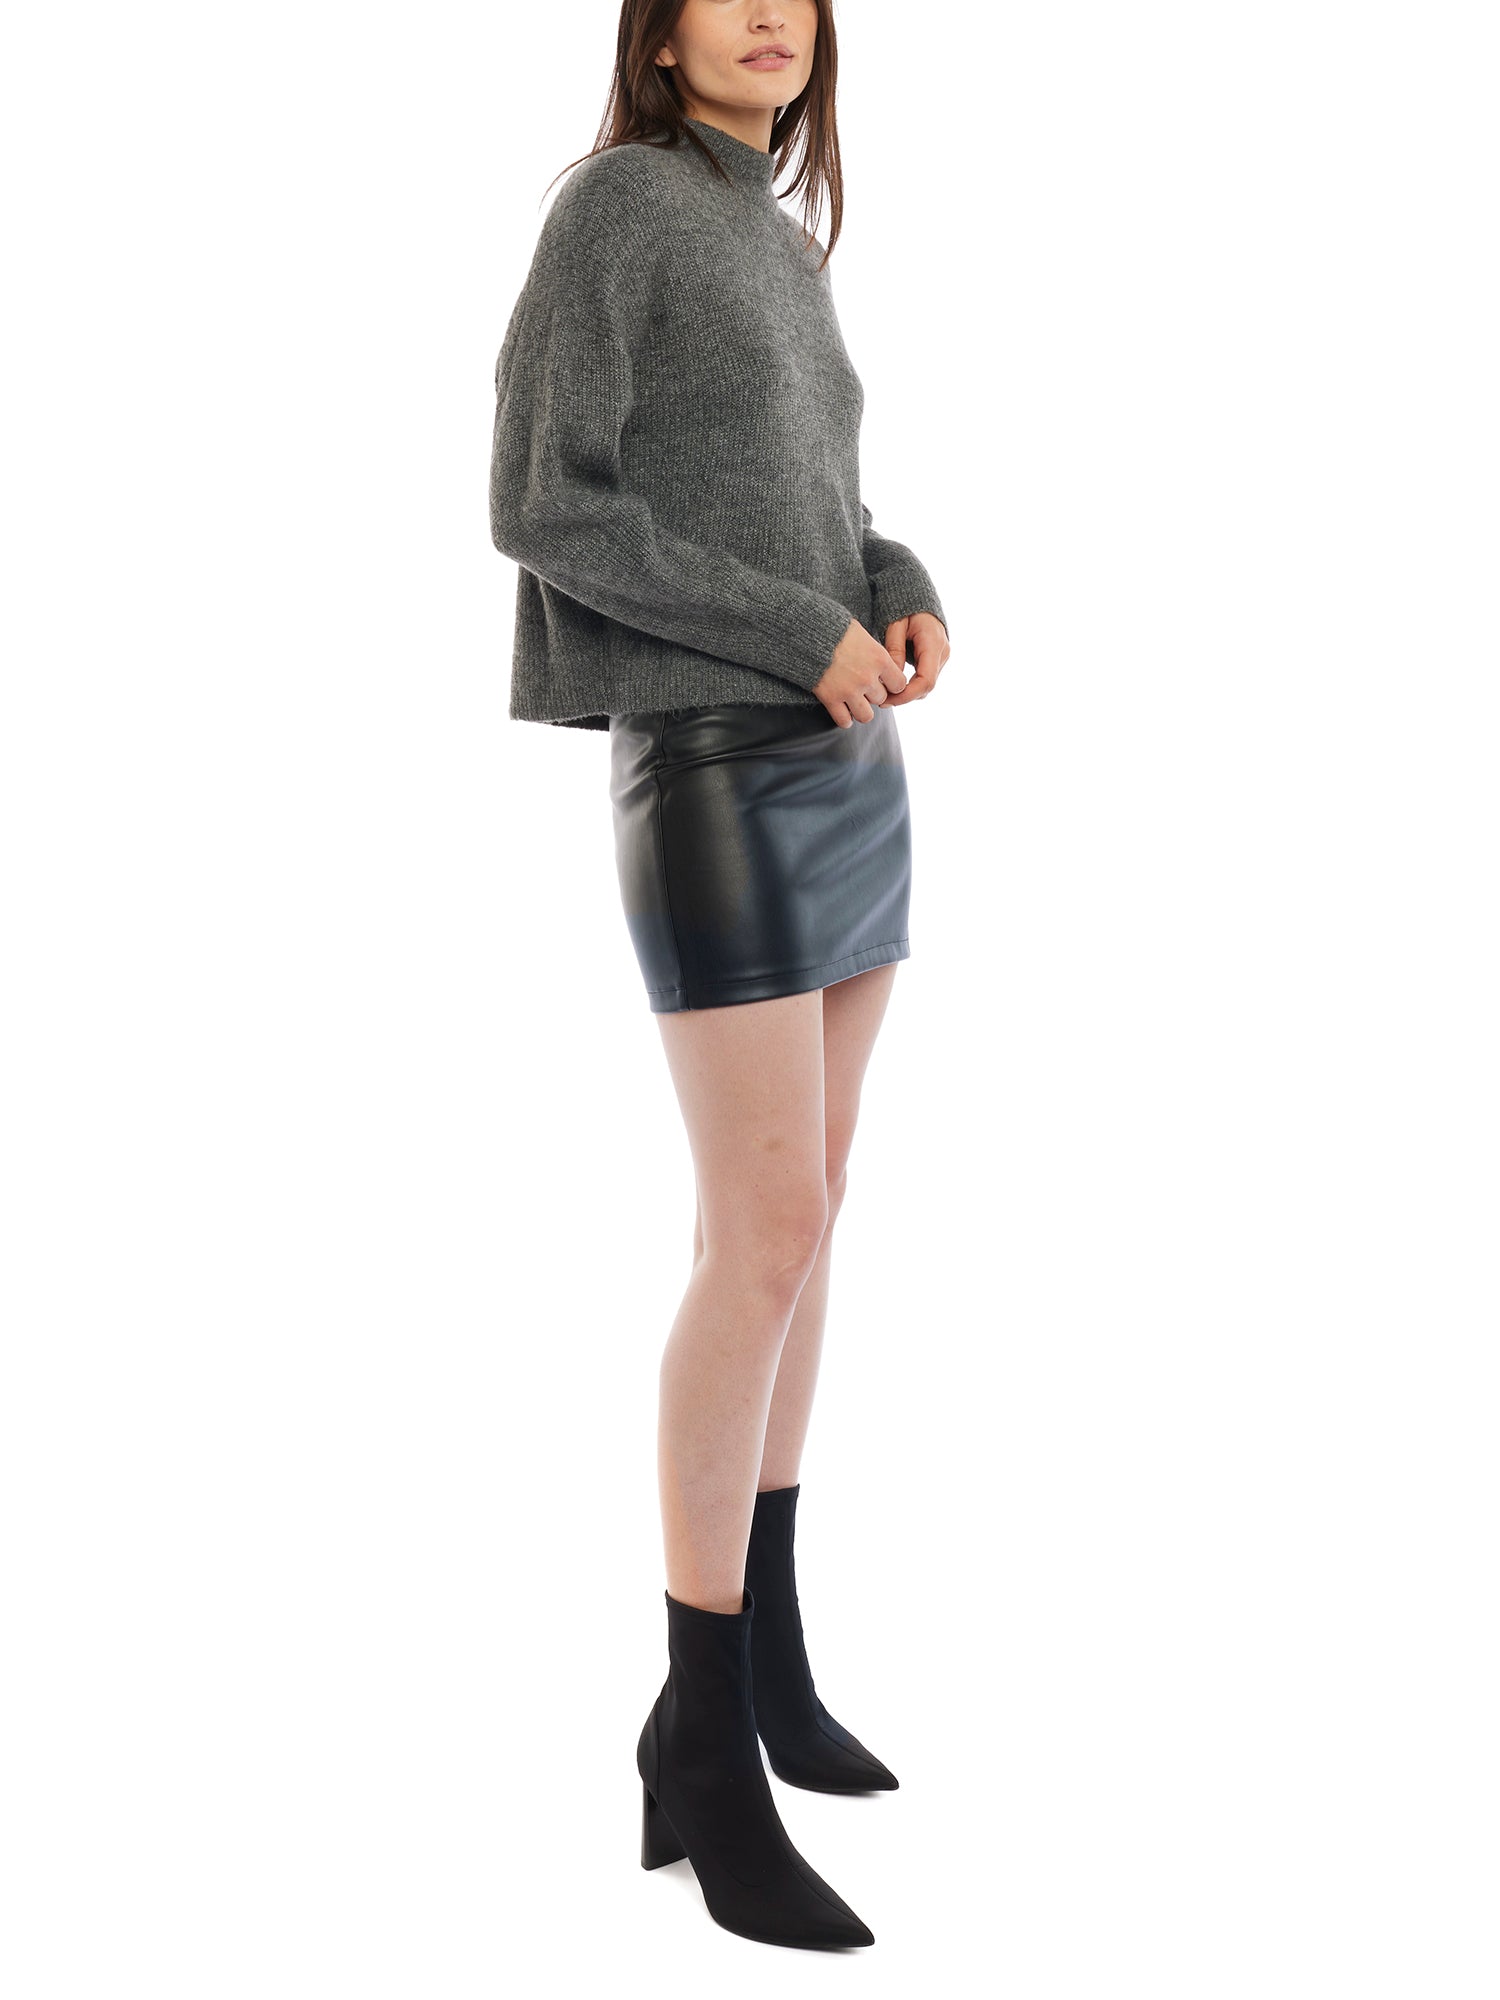 mock sweater features long sleeves and slightly cropped length in dark heather grey